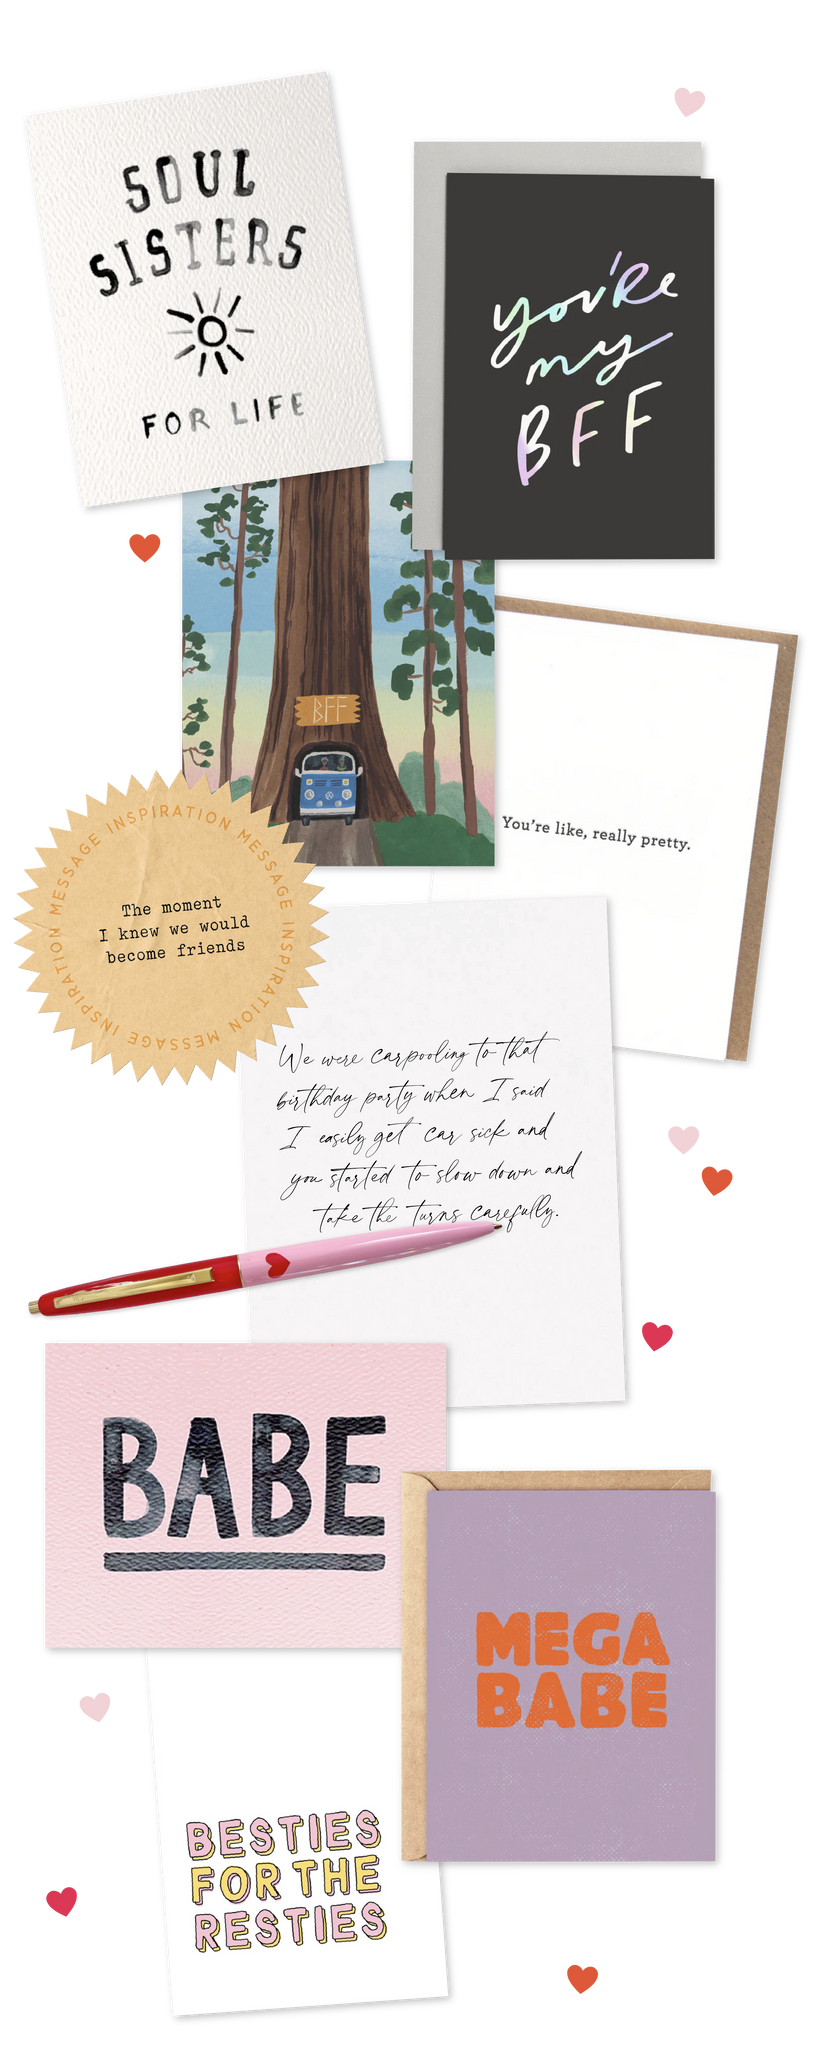 urbanic paper boutique los angeles california gifts stationery greeting cards valentines hearts pink and red love romance friendship friends bff babe besties